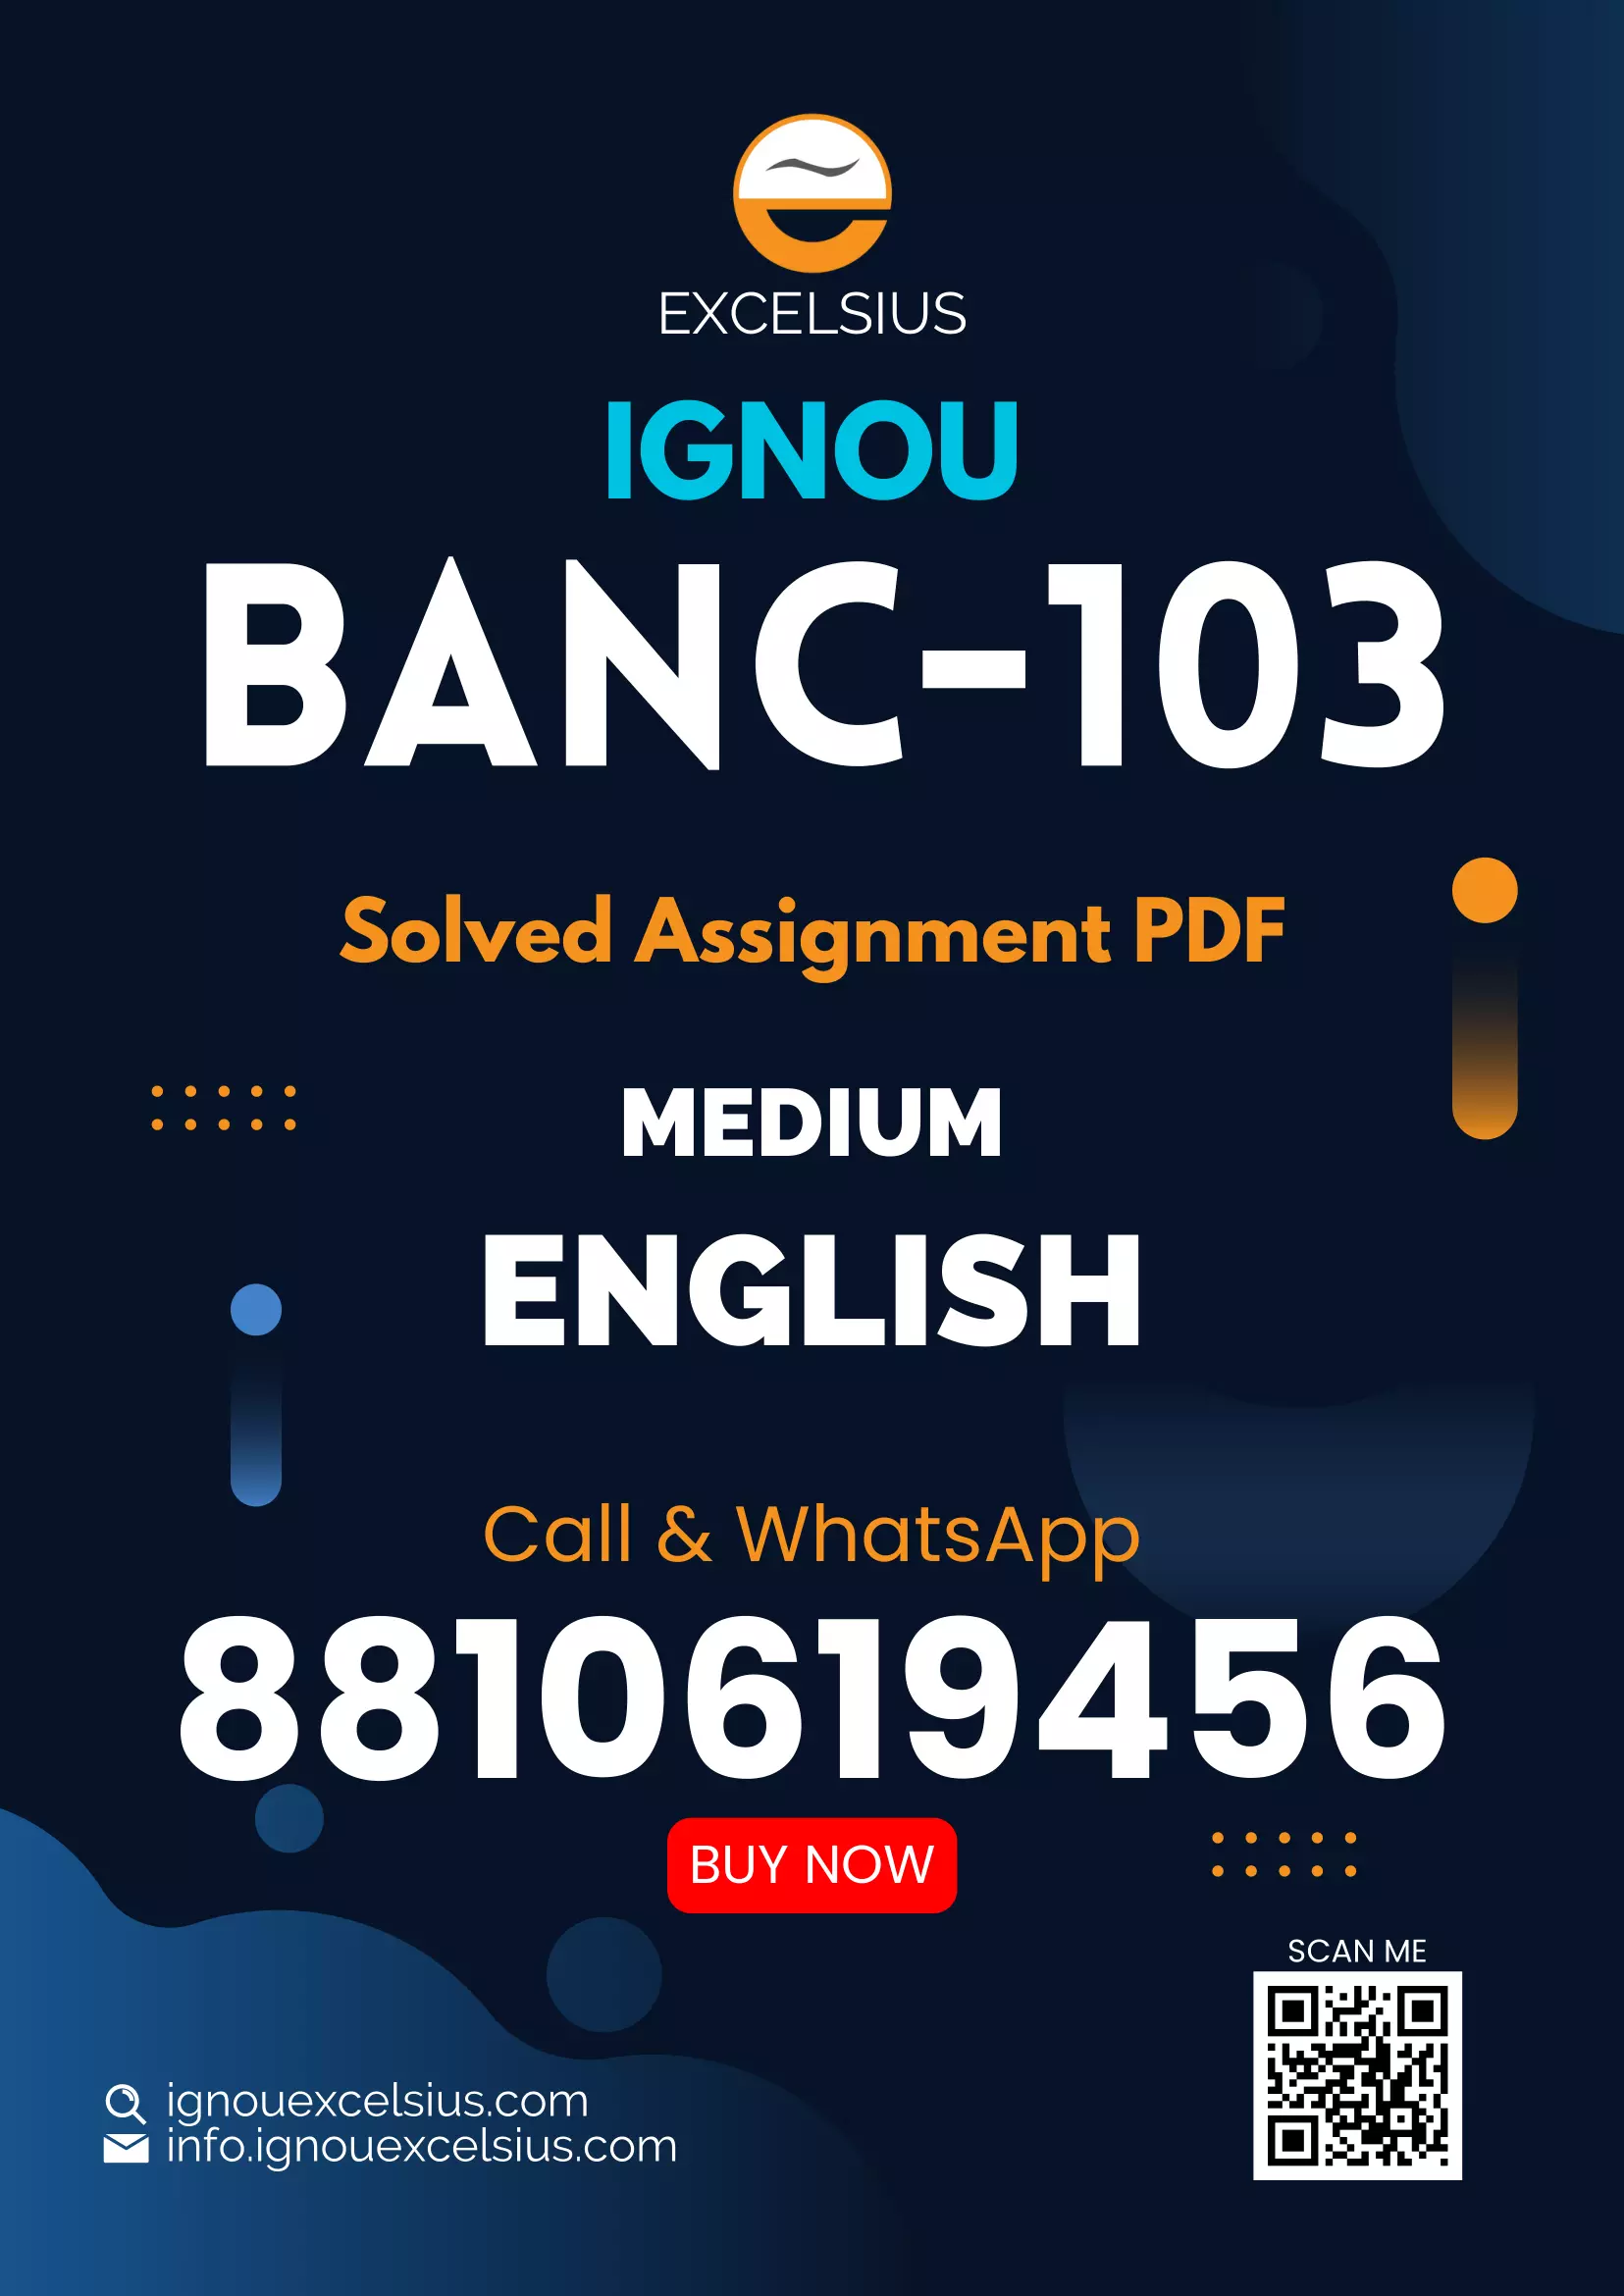 IGNOU BANC-103 - Archaeological Anthropology, Latest Solved Assignment-July 2022 – January 2023